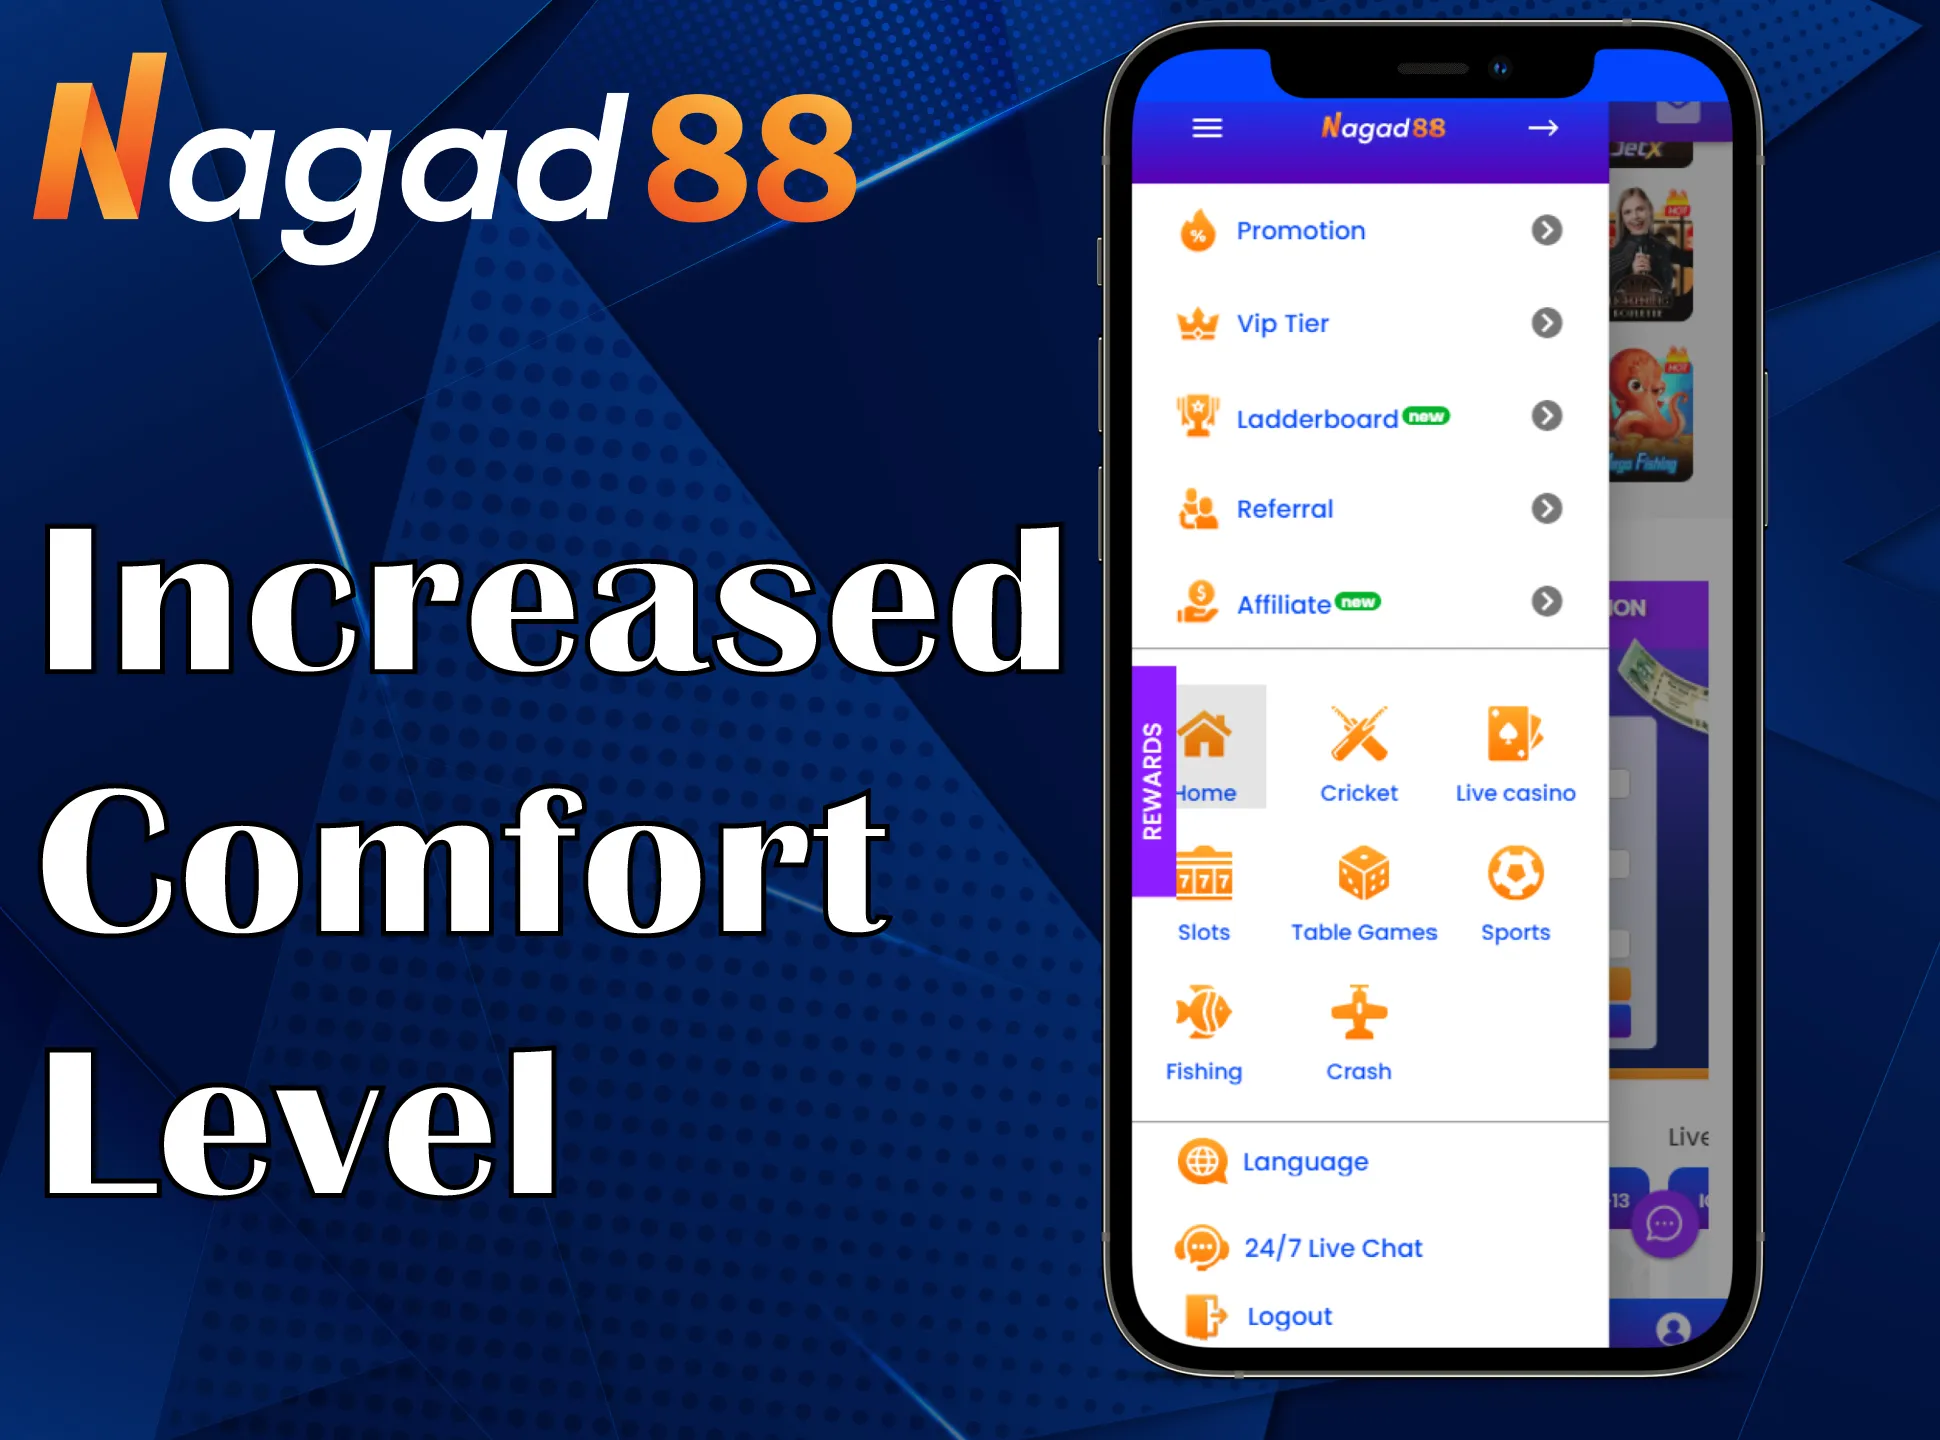 Try the handy and intuitive Nagad88 app.